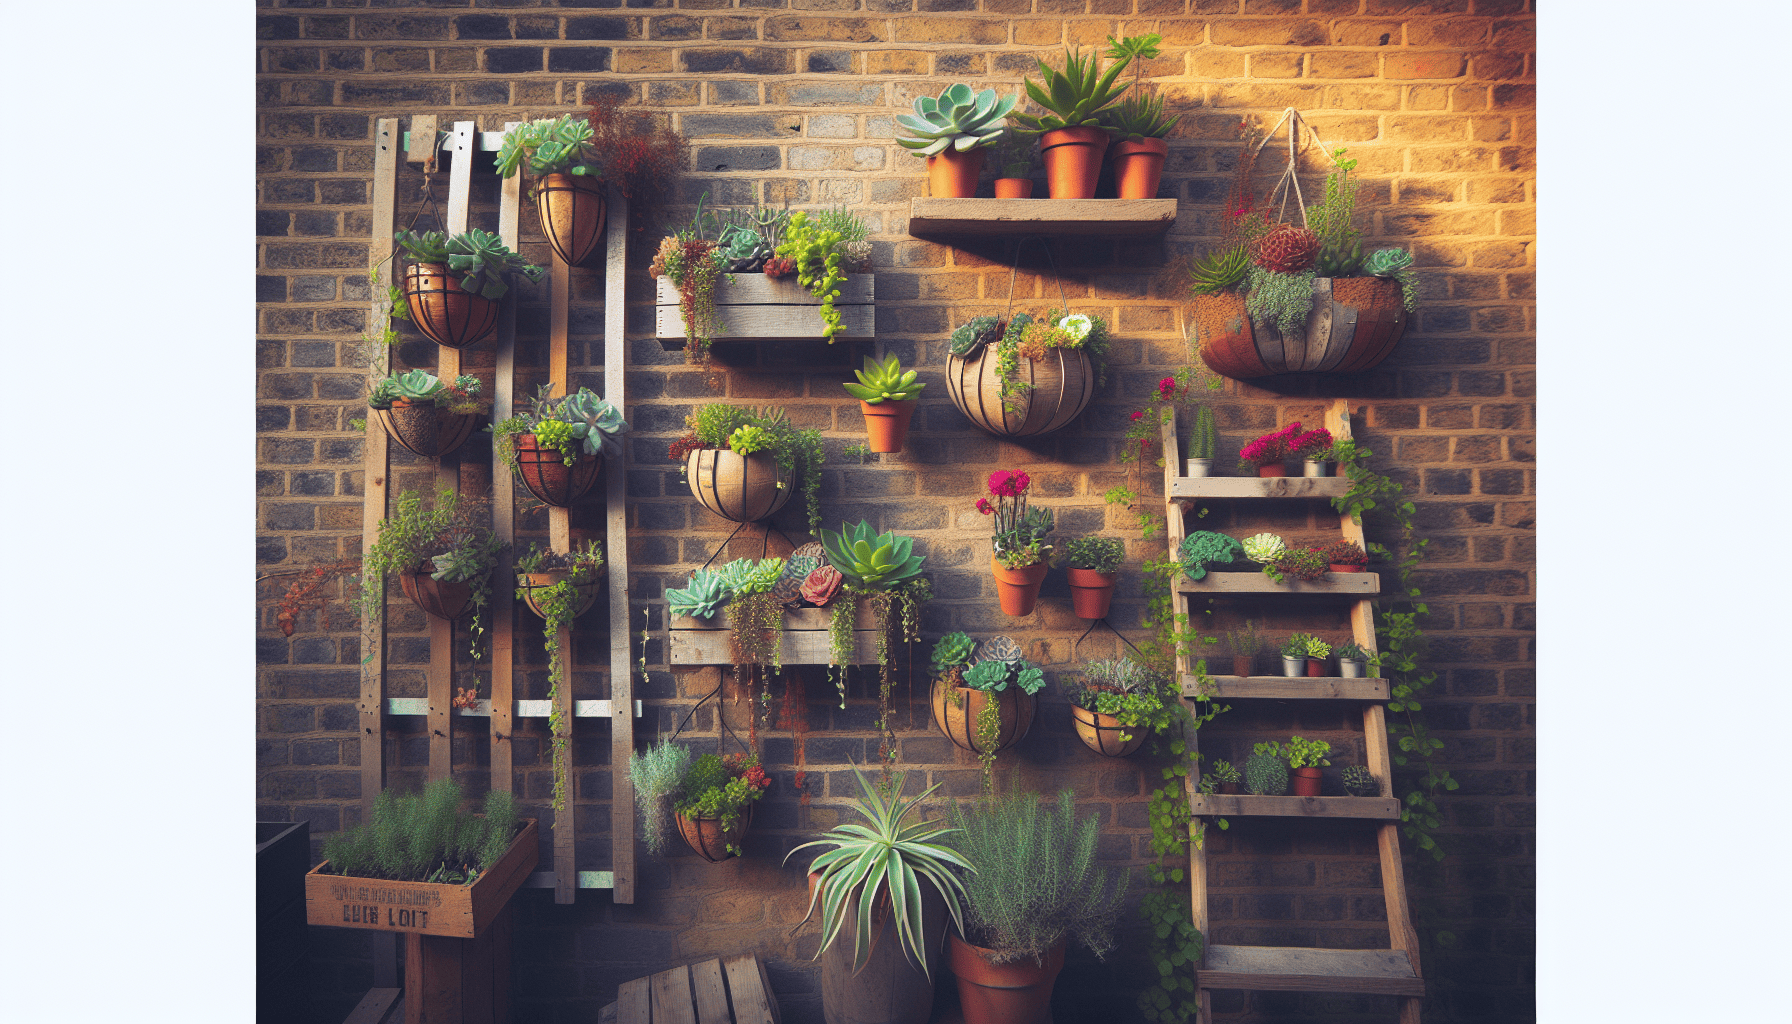 DIY vertical garden creations including upcycled container gardens and pallet planters